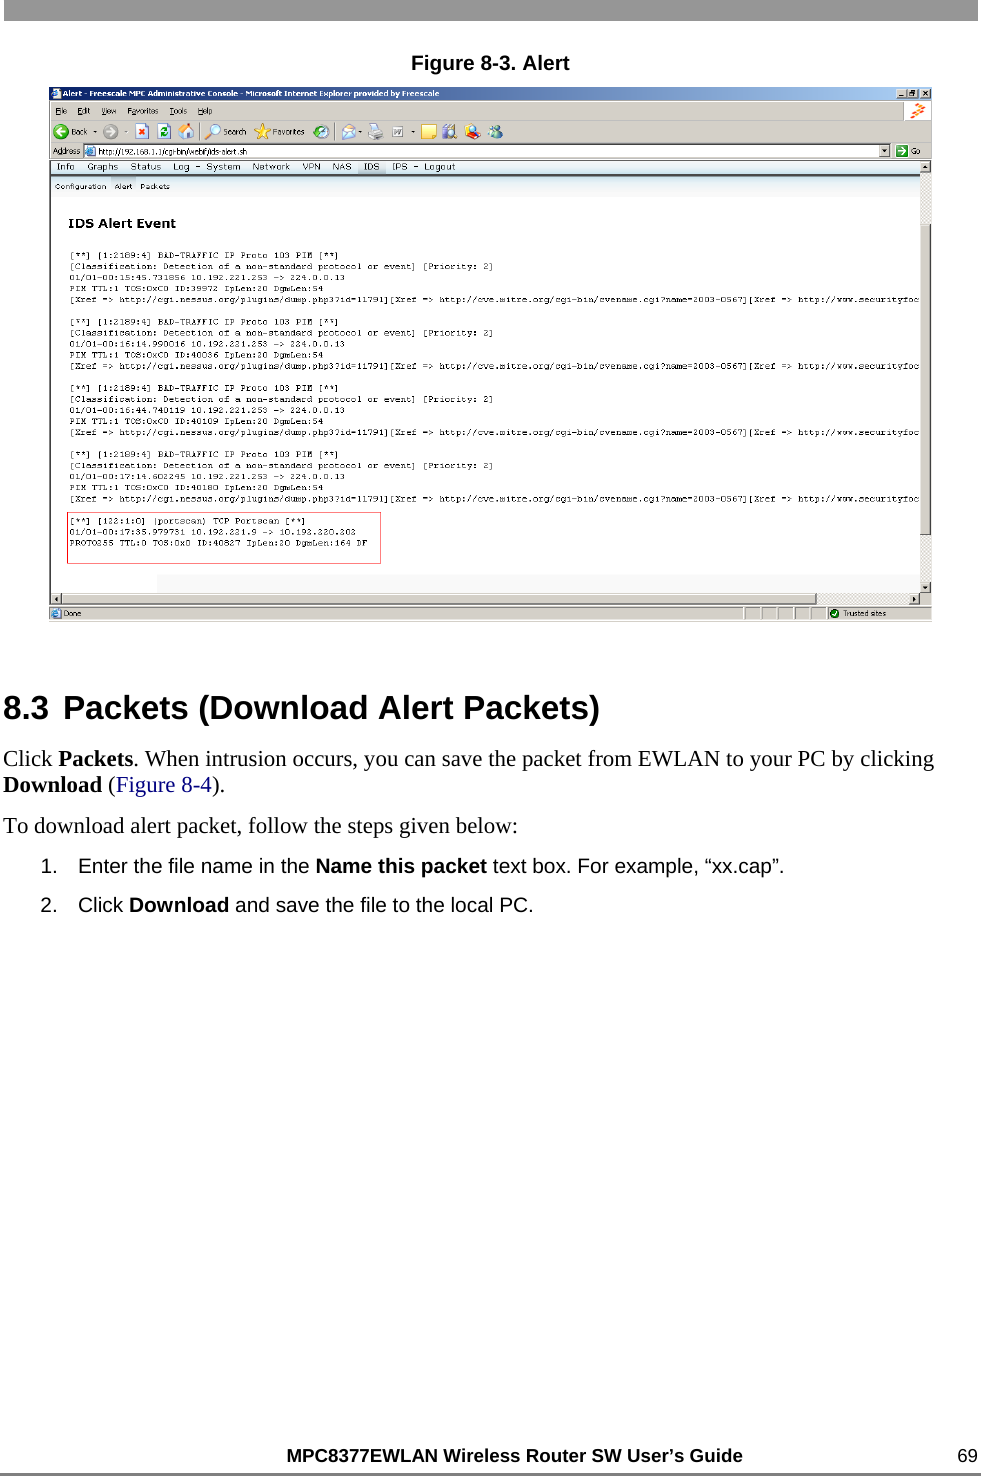                                                          MPC8377EWLAN Wireless Router SW User’s Guide    69 Figure 8-3. Alert  8.3 Packets (Download Alert Packets) Click Packets. When intrusion occurs, you can save the packet from EWLAN to your PC by clicking Download (Figure 8-4). To download alert packet, follow the steps given below: 1.  Enter the file name in the Name this packet text box. For example, “xx.cap”. 2. Click Download and save the file to the local PC.  